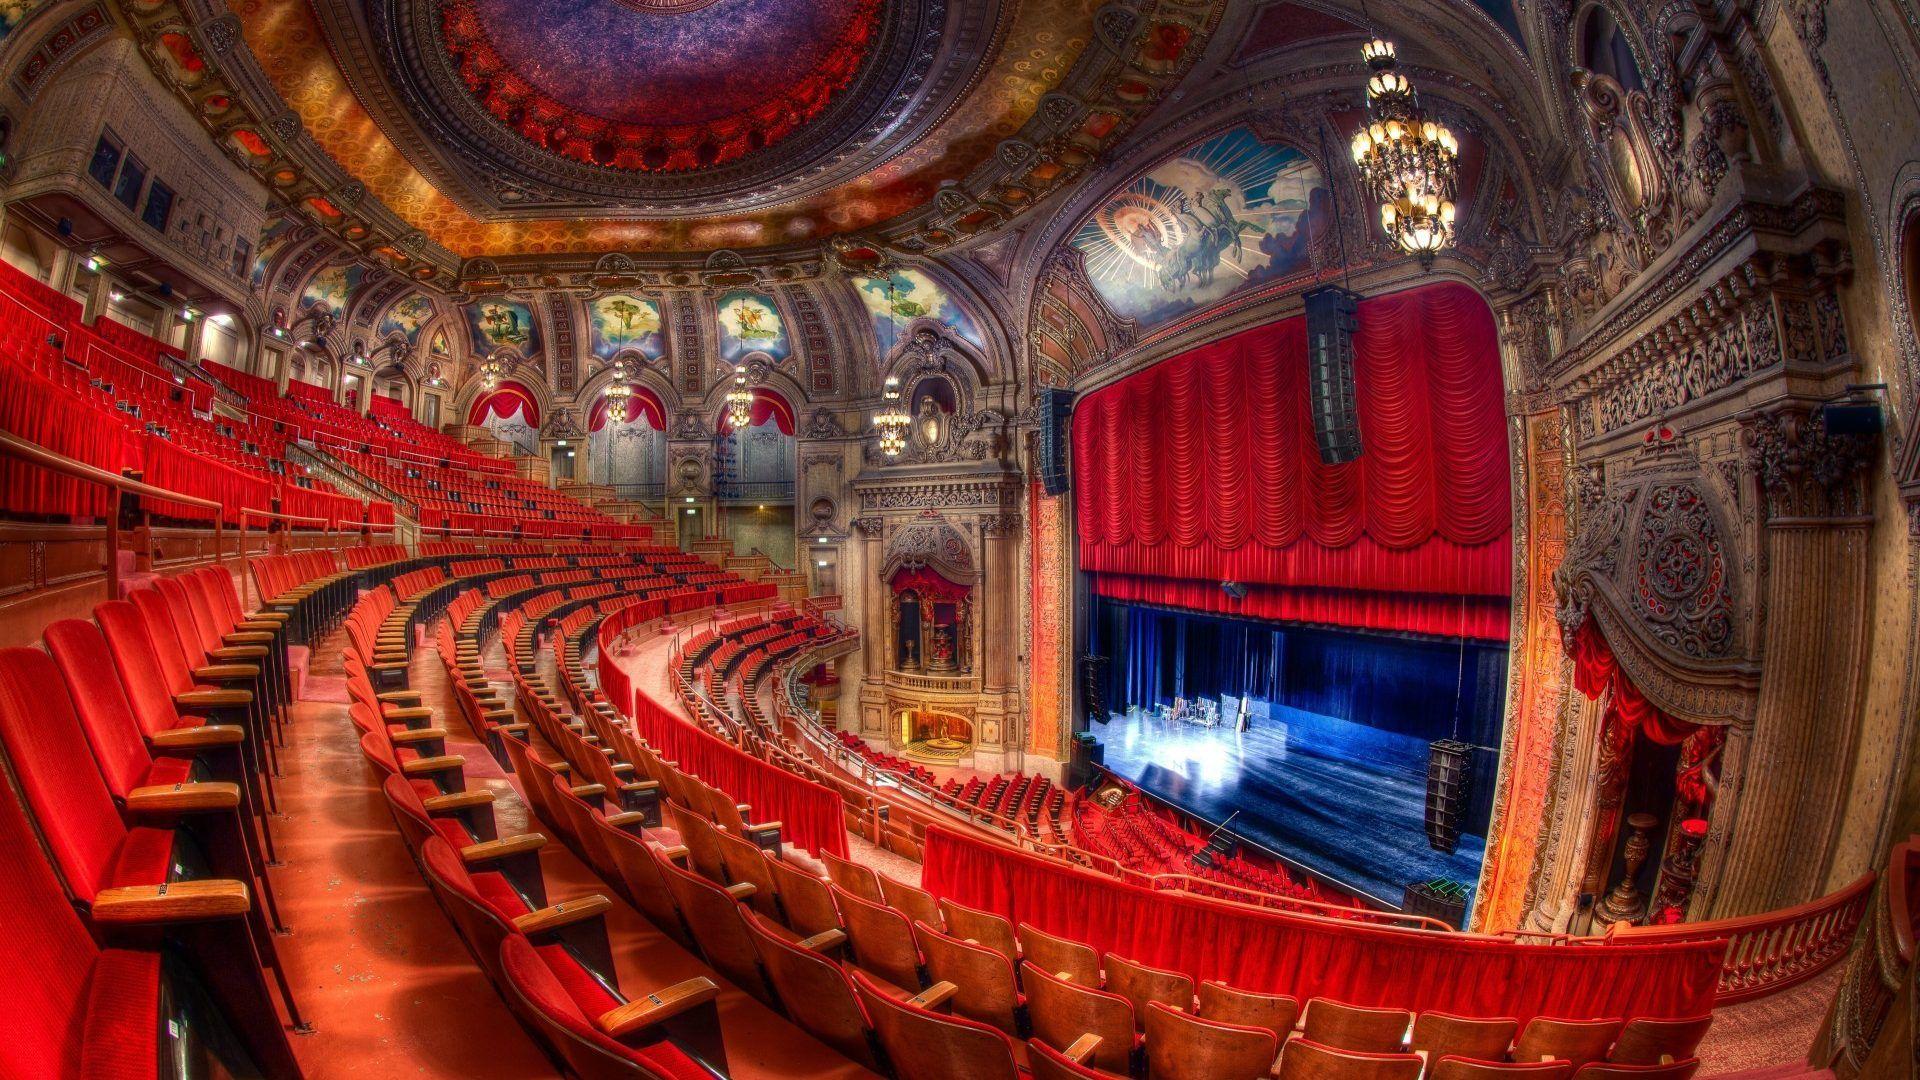 Theater Tag wallpaper: Marvelous Ornate Theater Stage Seats High